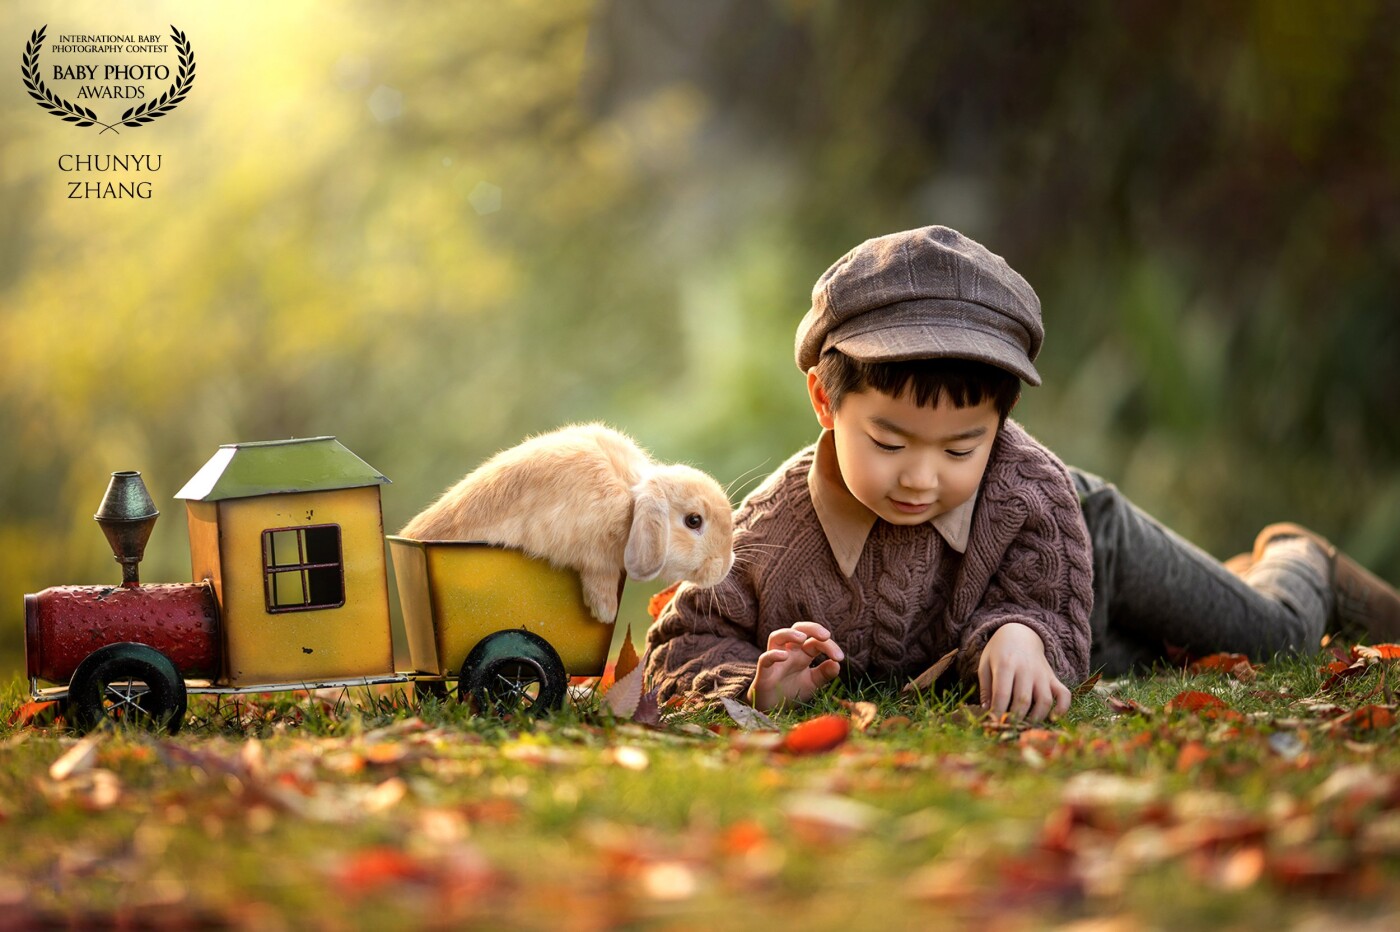 The little boy put the bunny in a nice yellow toy car and played with the bunny.The little rabbit also stuck his head out and looked at the ground with him. They were having a really good time together.